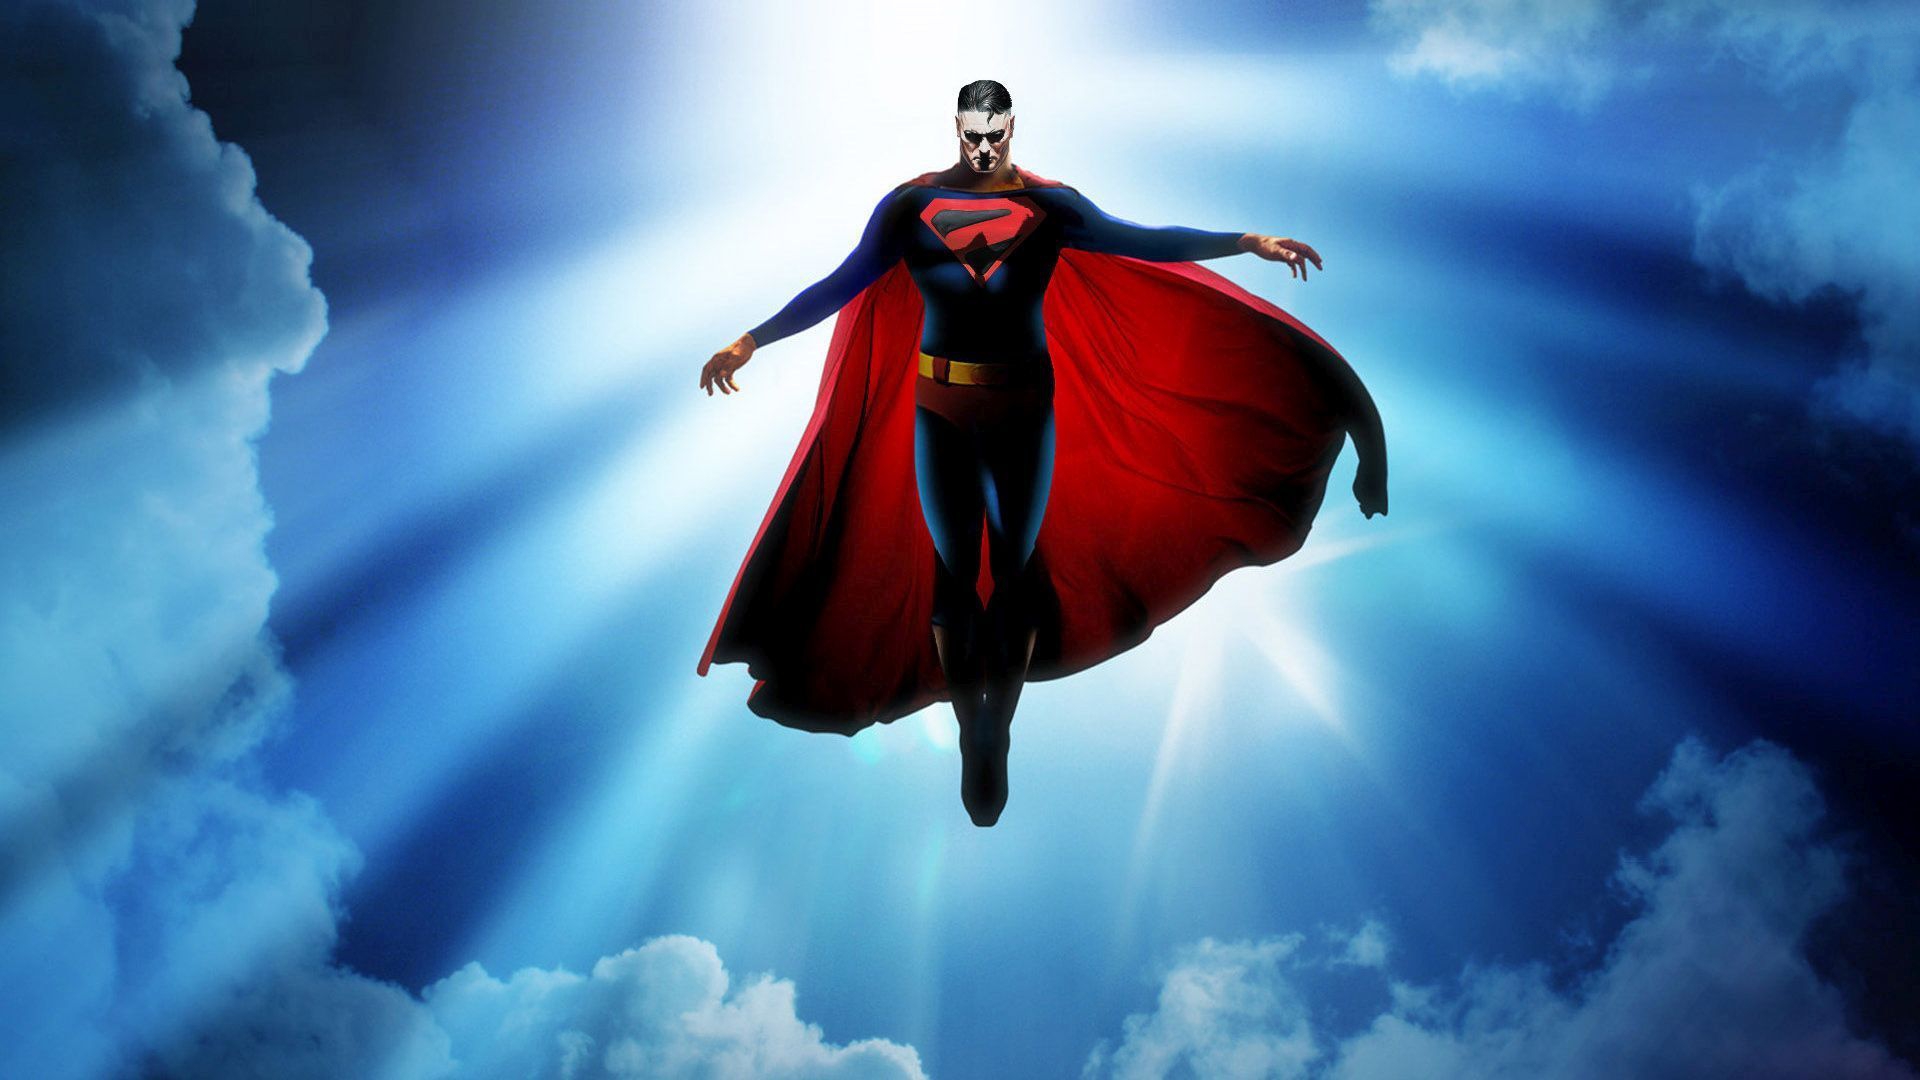 superman wallpaper hd for android,superman,superhero,fictional character,sky,justice league